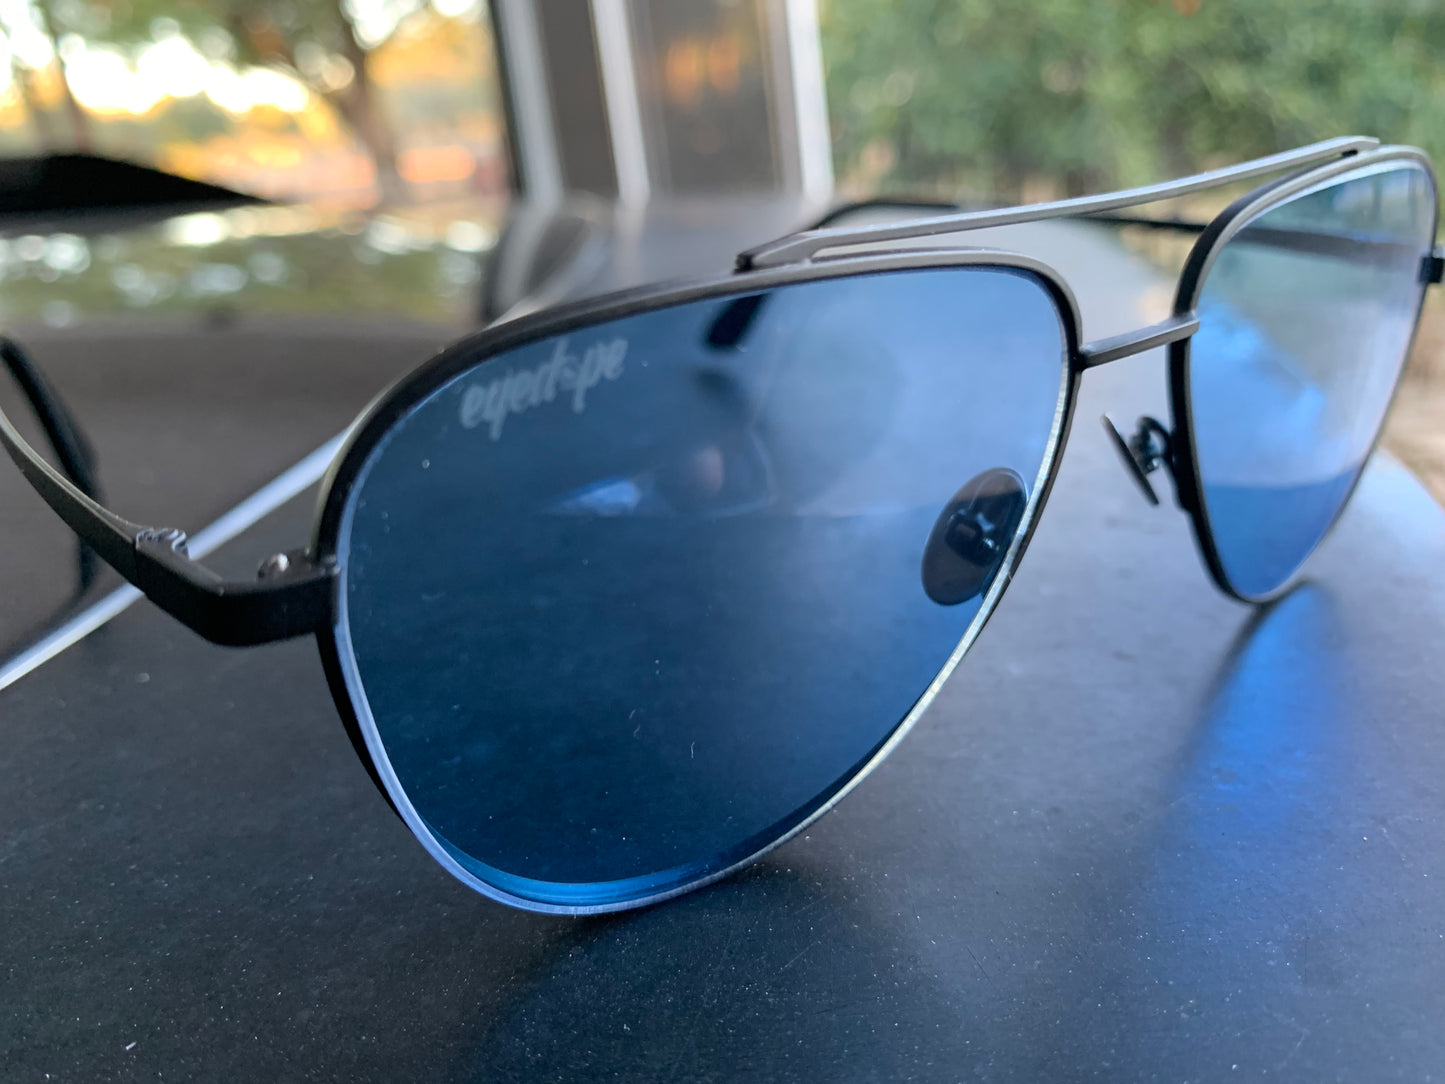 EyeDope aviator sunglasses with blue solid tint lenses.